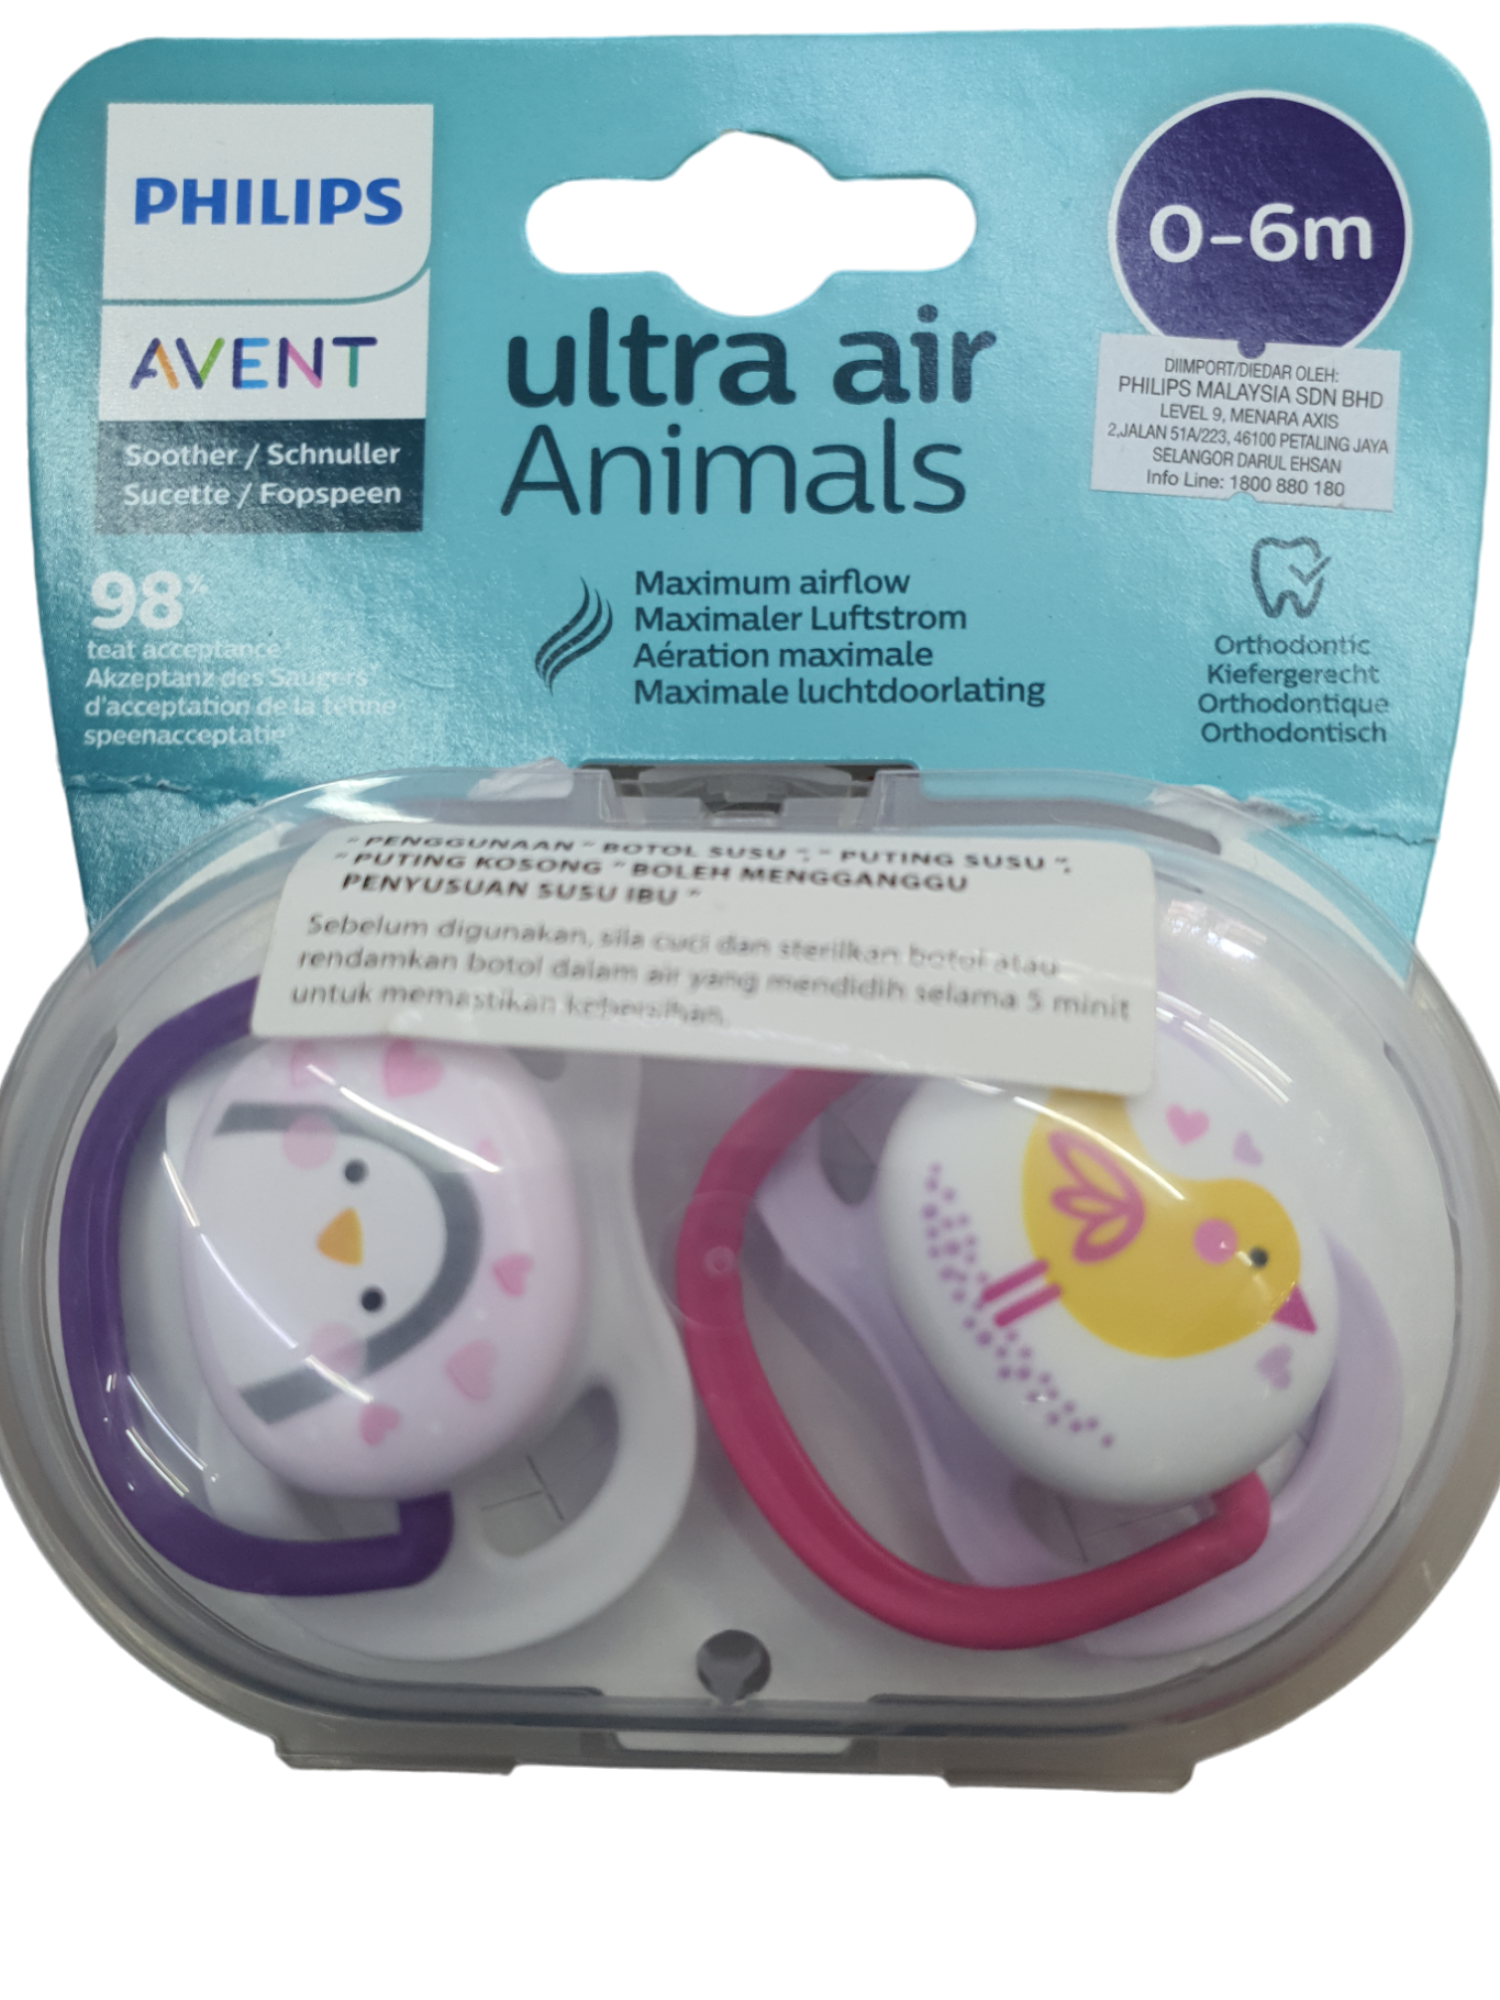 PHILIPS AVENT ULTRA LIME AIR ANIMALS 0-6M+